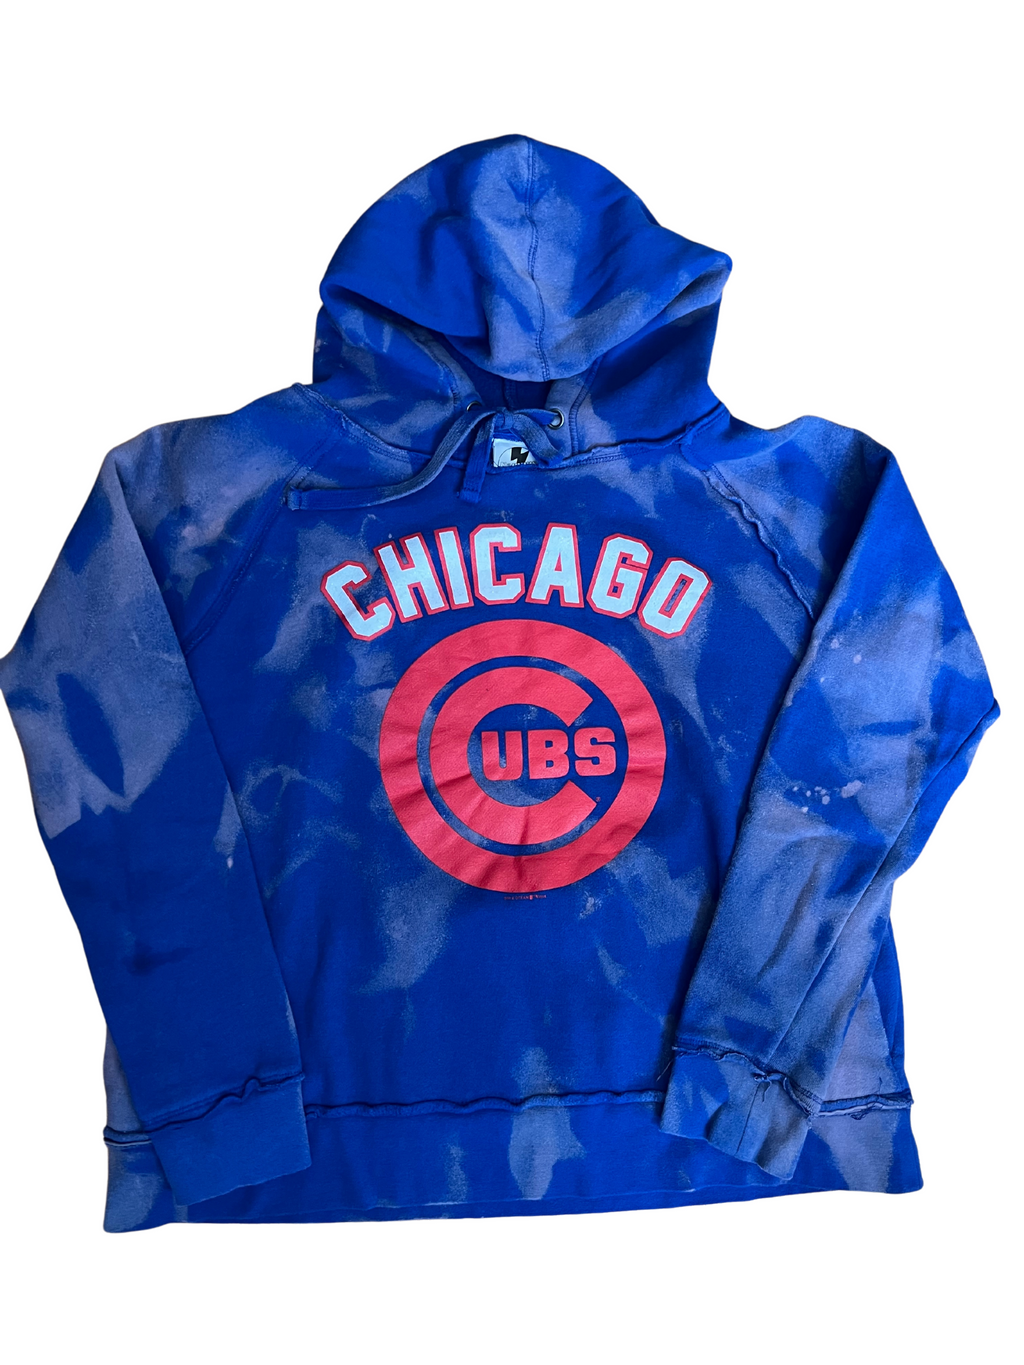 Chicago Cubs Bleached Sweatshirt